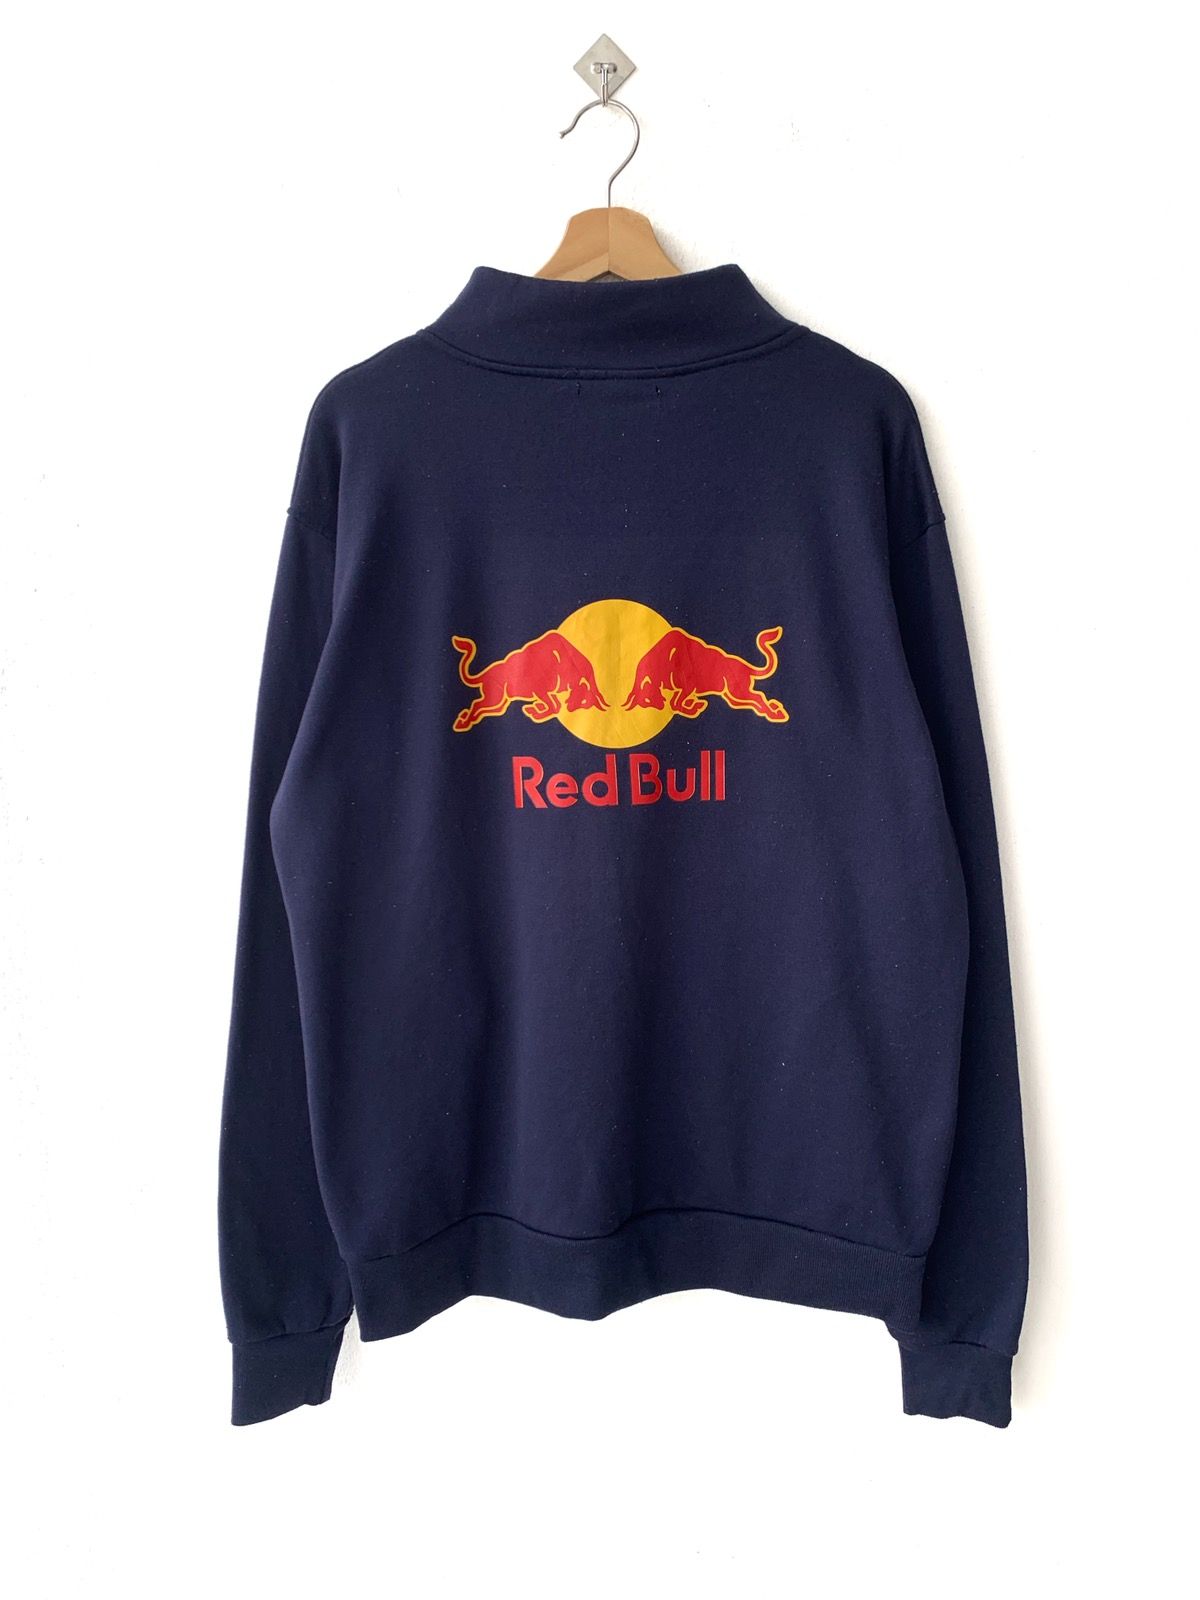 Red Bull Vintage Red Bull Sweatshirt Size US XL / EU 56 / 4 - 1 Preview